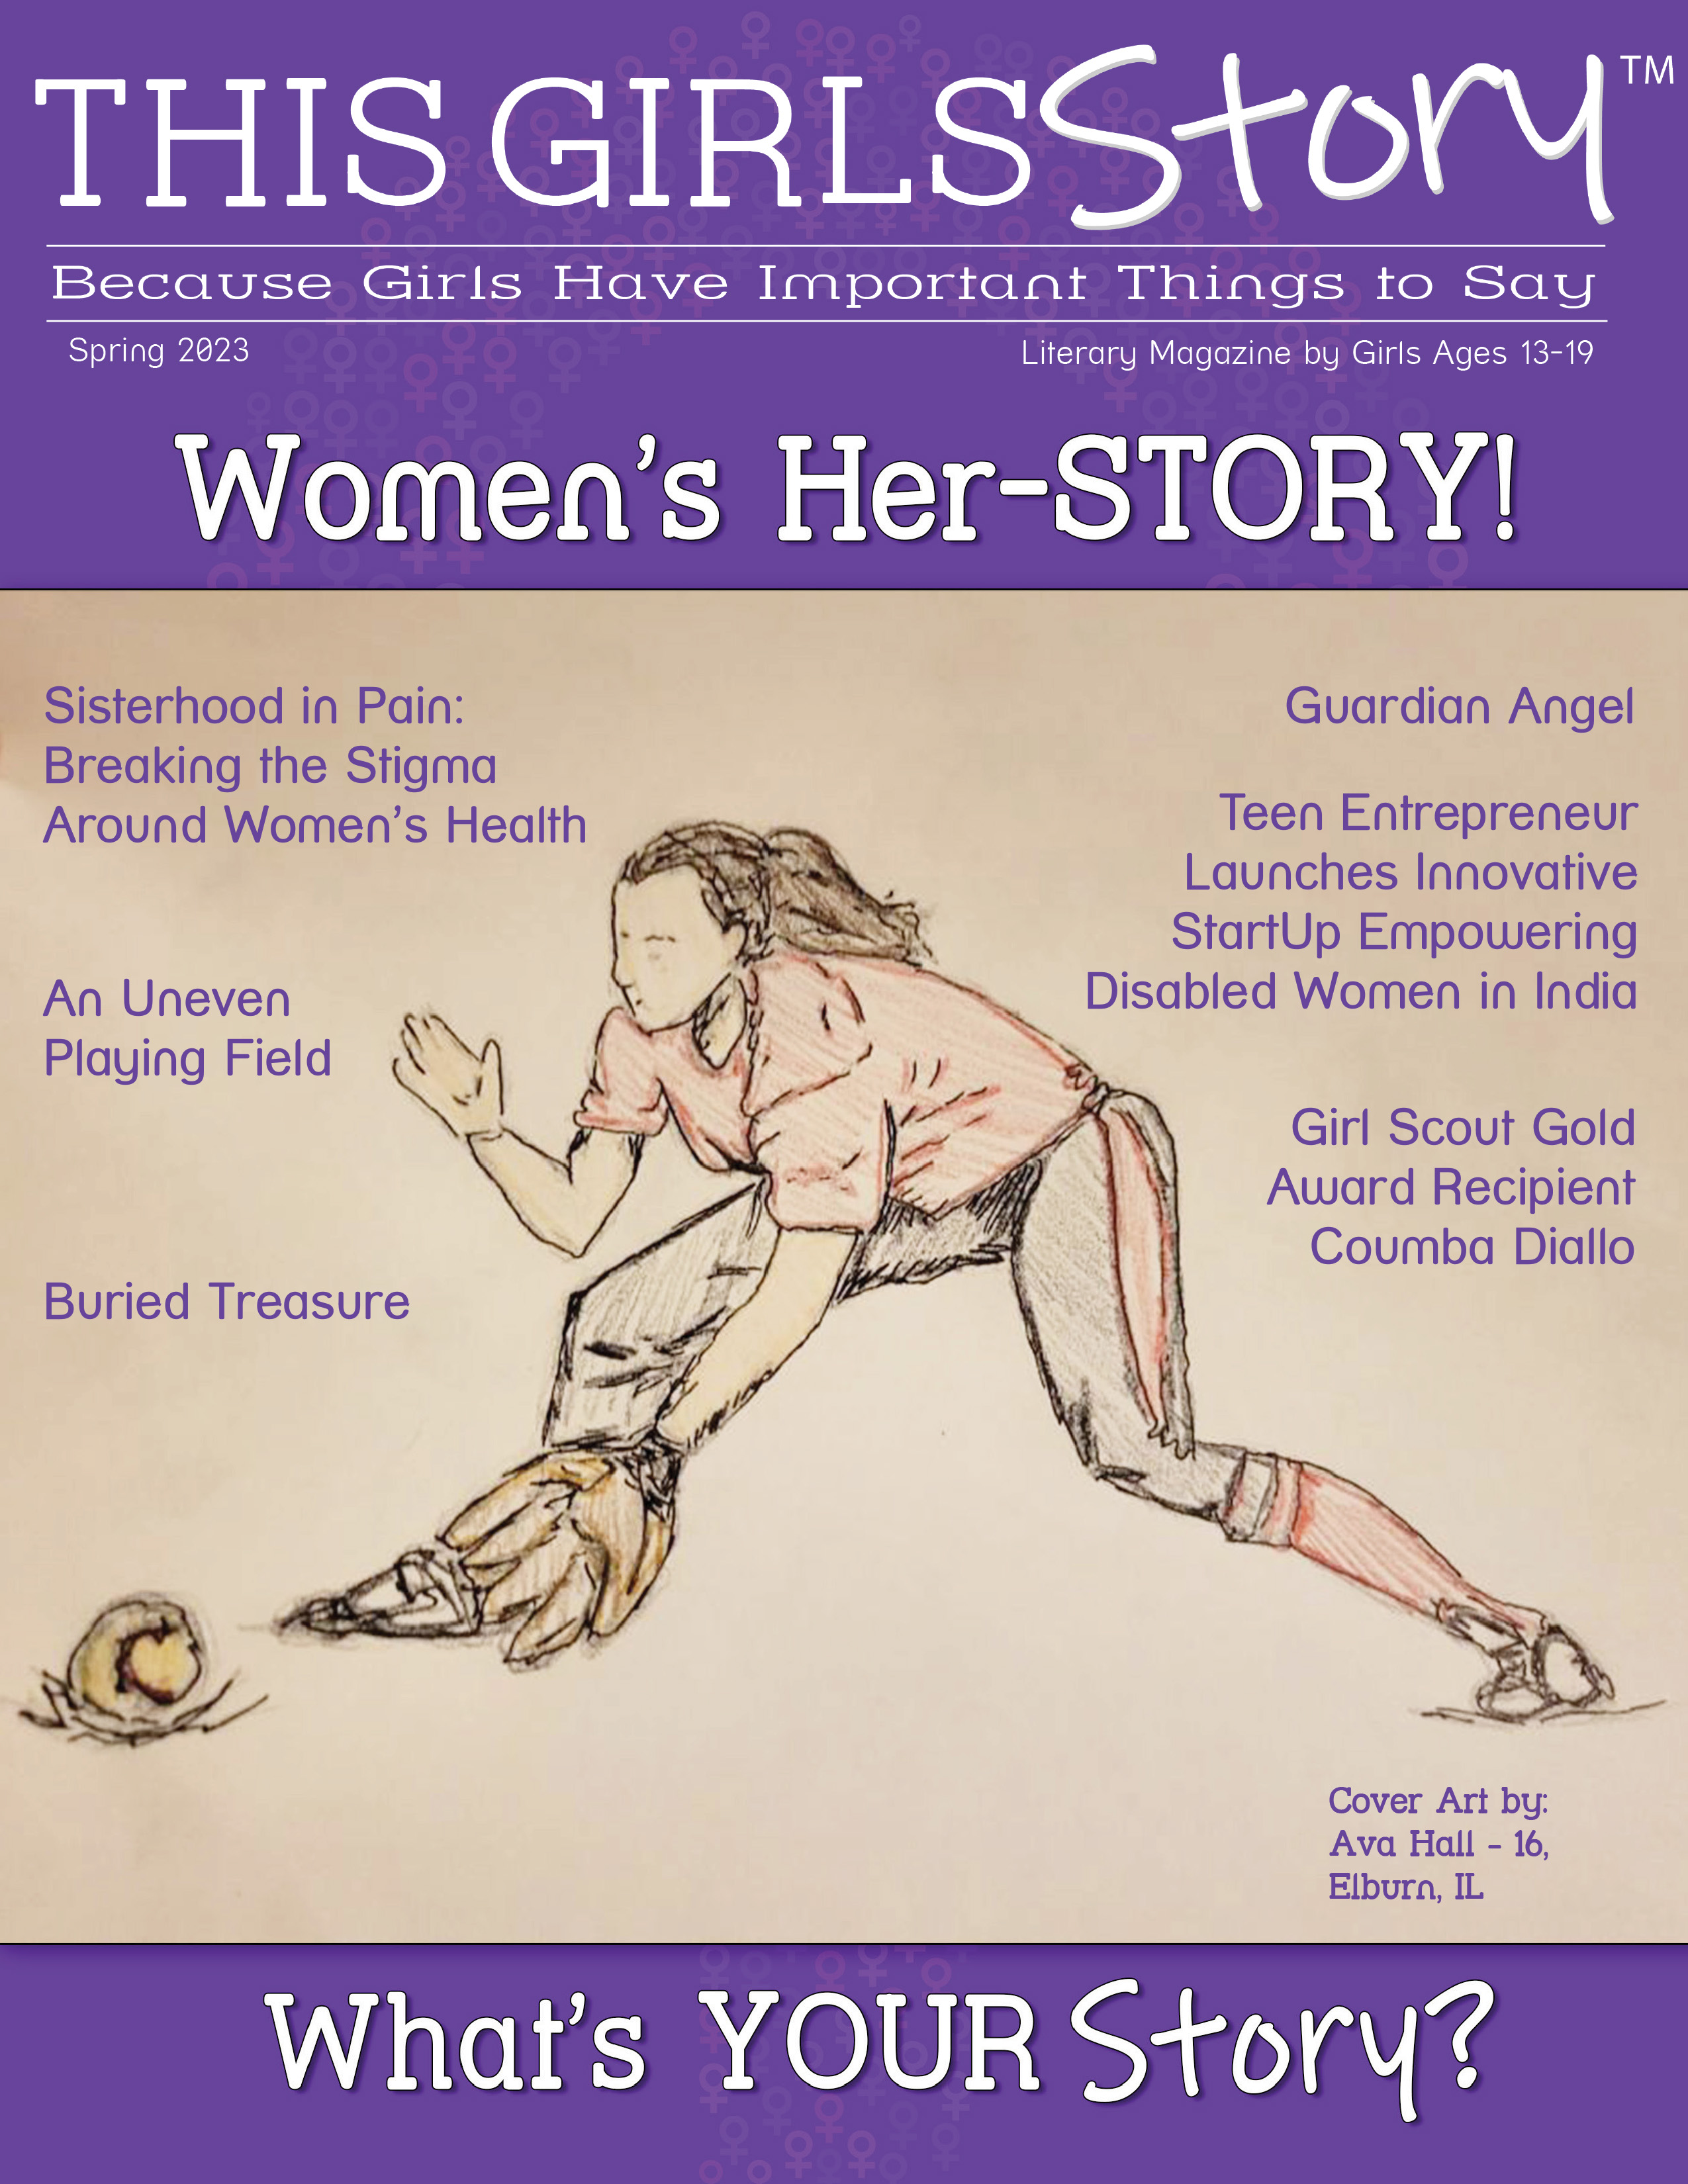 This TGS Digital Magazine Spring 2023 Issue: Women's HerSTORY, What's YOUR Story? is made with love by This Girls Story! Shop more unique gift ideas today with Spots Initiatives, the best way to support creators.